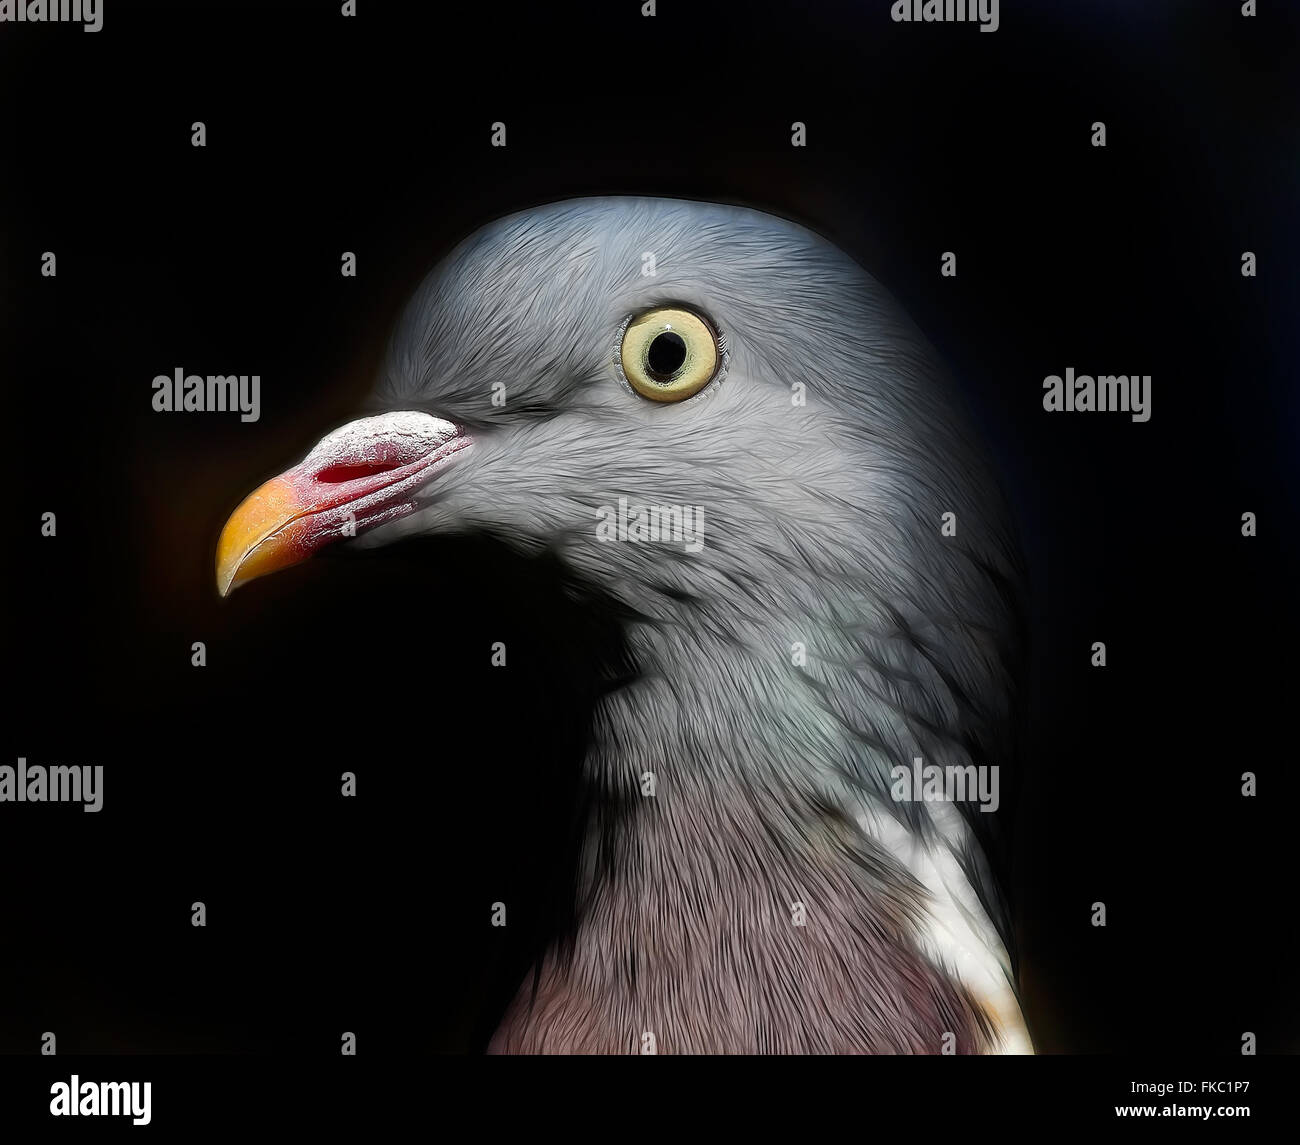 A side view portrait of a pigeons face Stock Photo